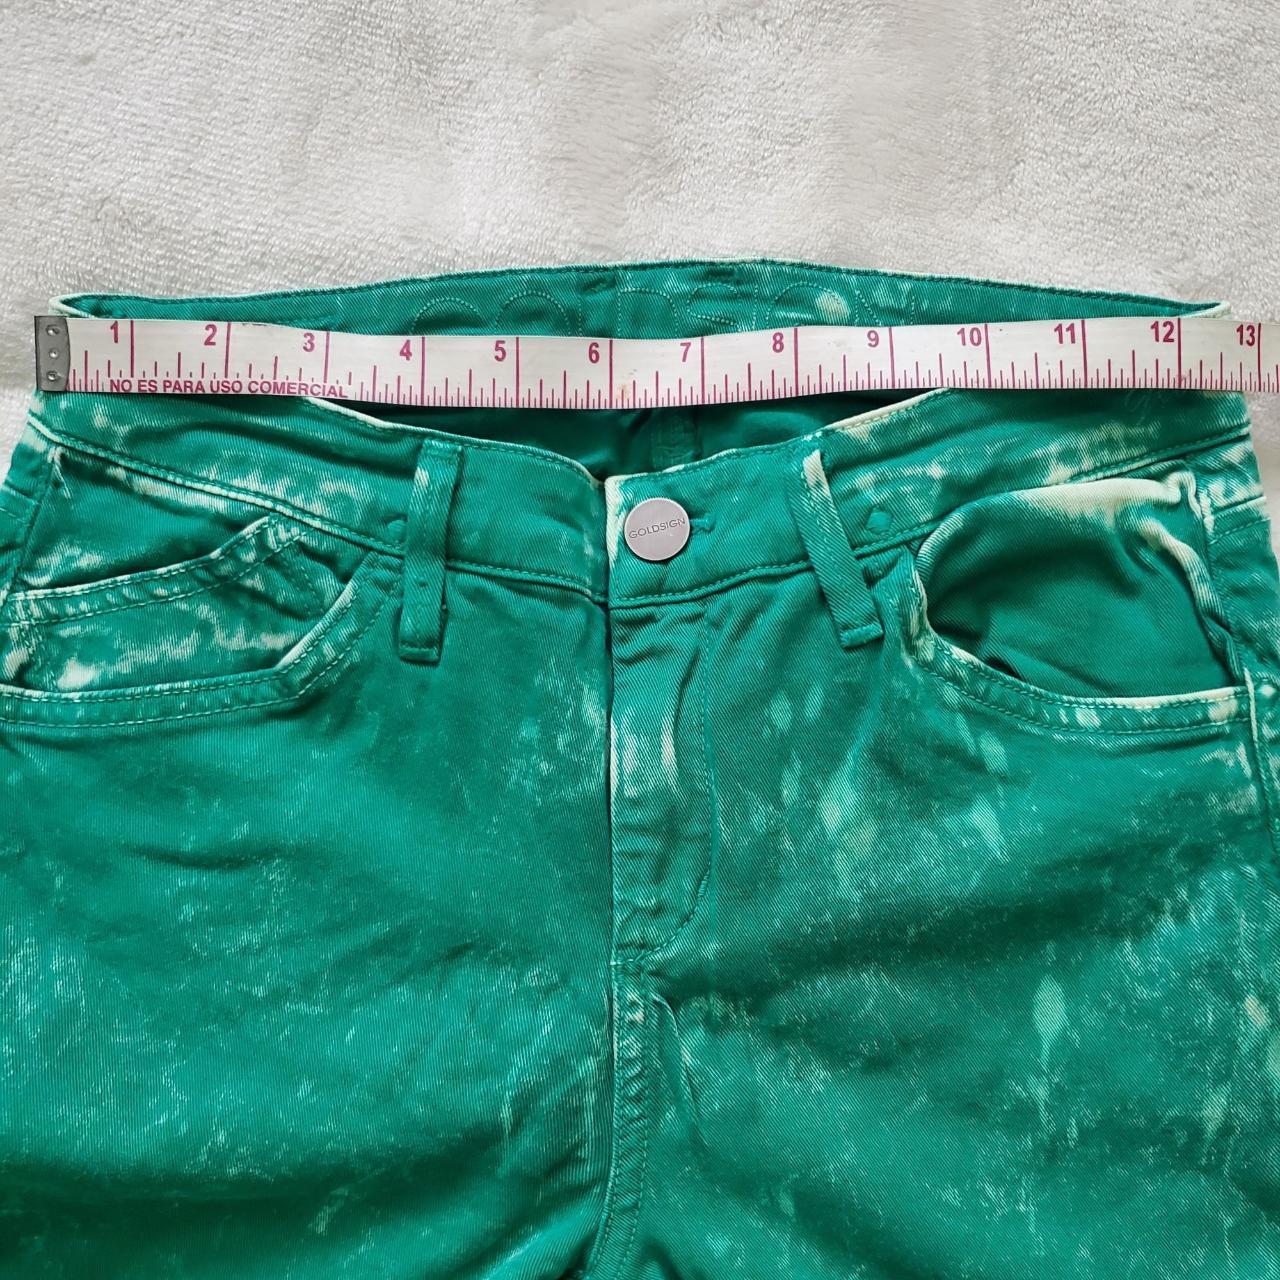 Product Image 4 - Goldsign glam jeans
Size 27
Green color
Bleached
Stretchy
5